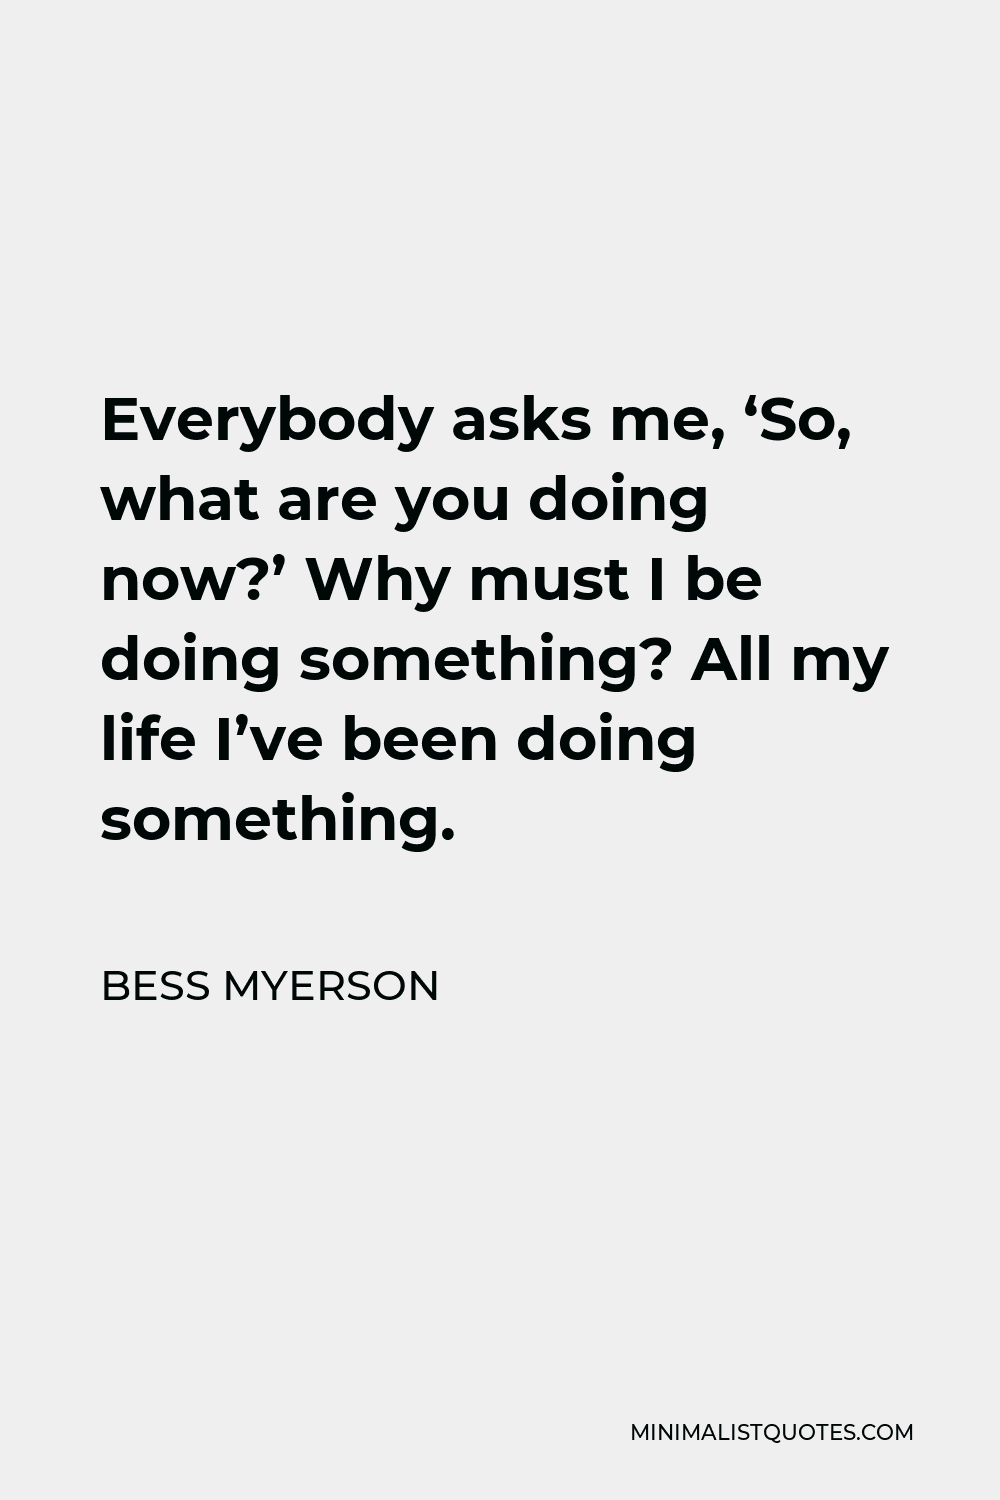 Bess Myerson Quote - Everybody asks me, ‘So, what are you doing now?’ Why must I be doing something? All my life I’ve been doing something.